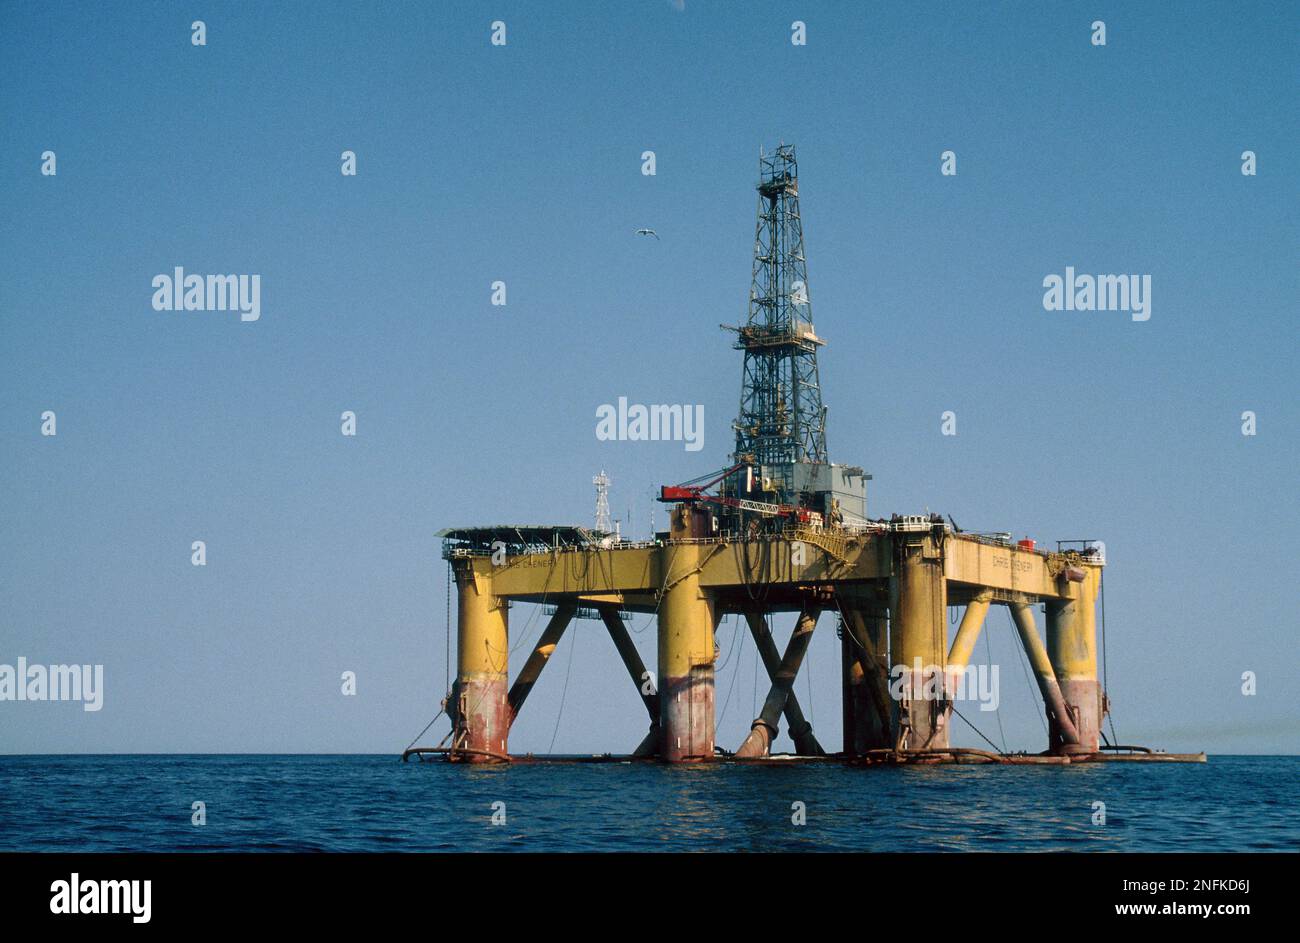 United Kingdom. Oil industry. Chris Chenery oil rig off Lands' End, Cornwall. 1979. Stock Photo